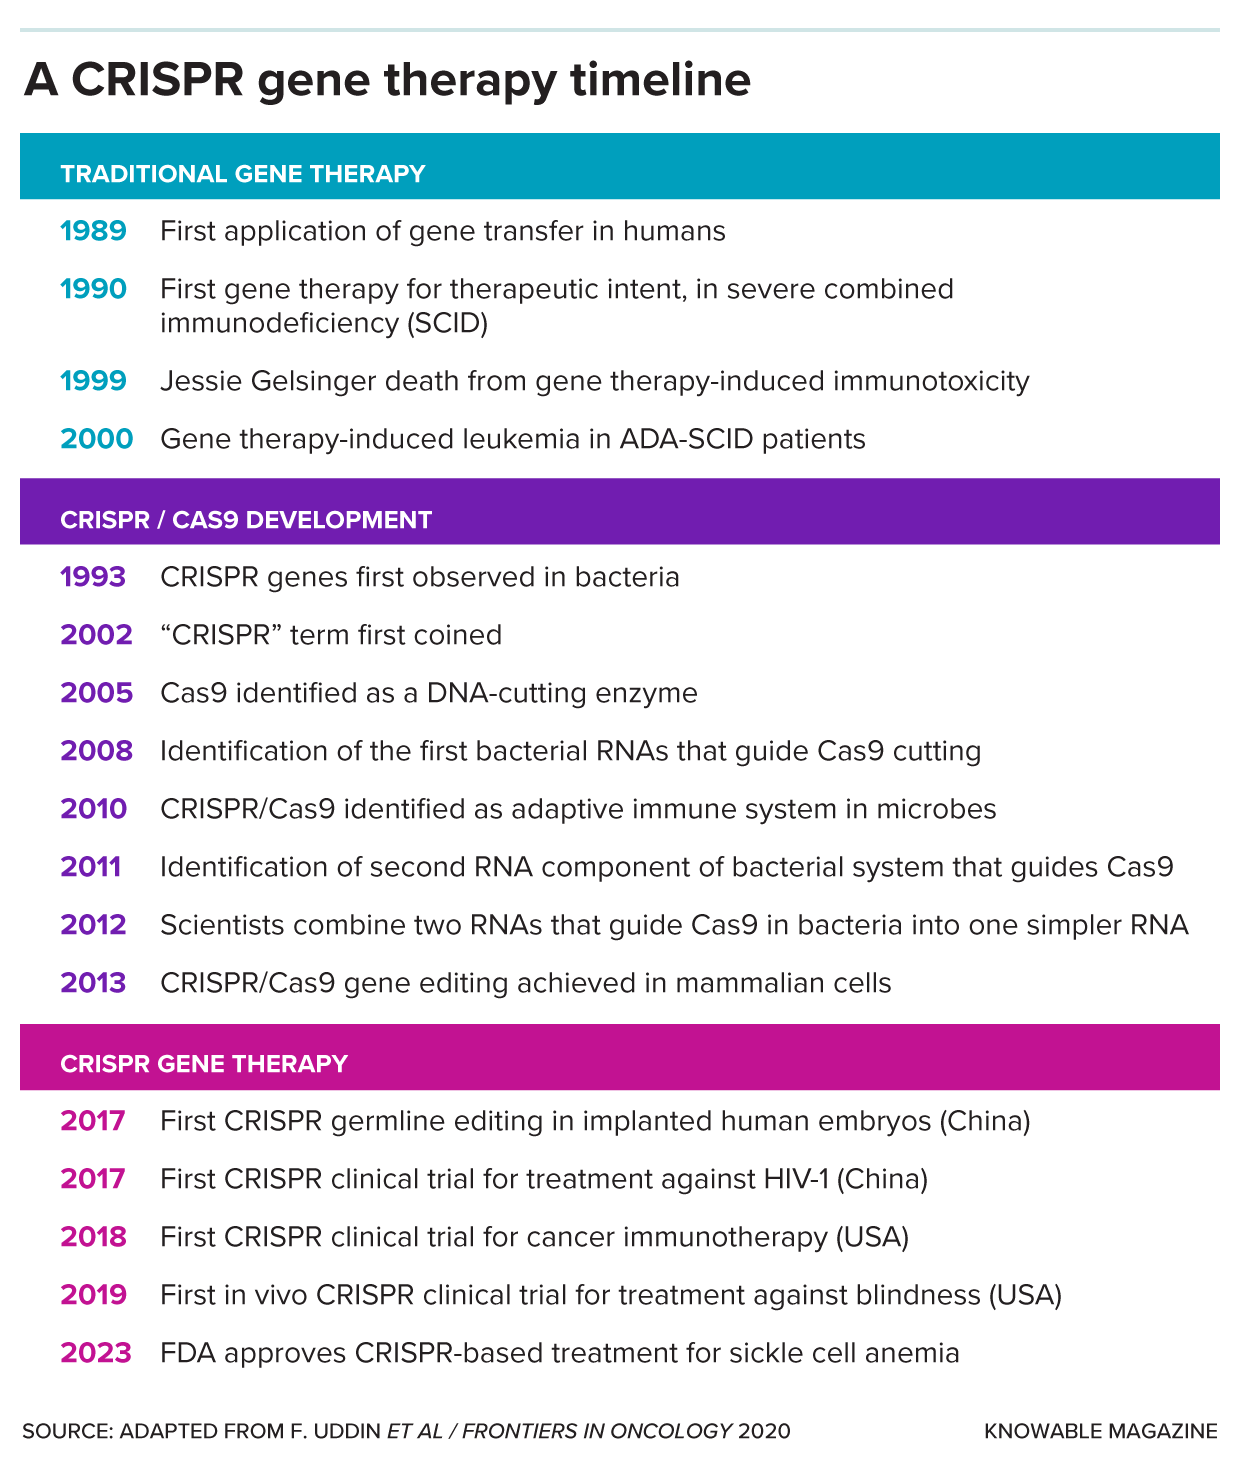 A timeline illustrates key events in gene therapy and CRISPR/Cas research, starting with traditional gene therapy in the late 20th century through to the first CRISPR-based treatment, for sickle cell anemia, to be approved by the FDA (in 2023).